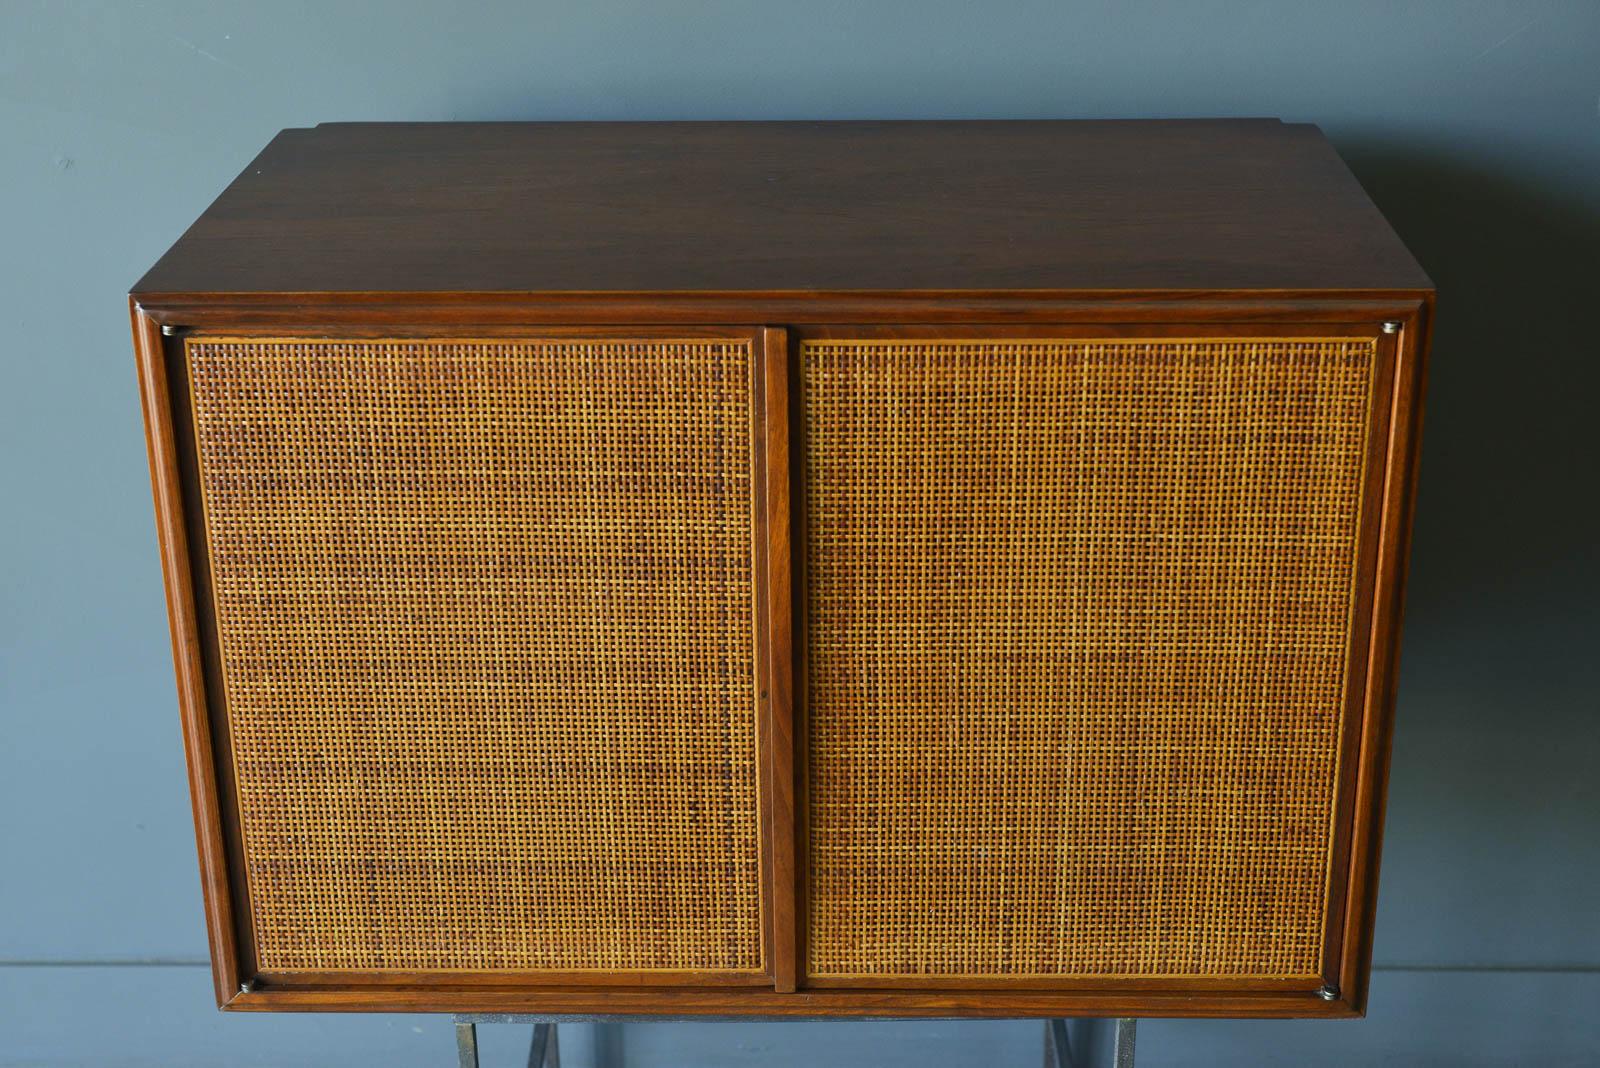 Walnut and cane floating cabinet, ca. 1955. Gorgeous walnut and cane floating cabinets or side table/nightstand. This beautiful piece has a custom bespoke made bracket that will allow you to float on the wall and sits flush when easily installed.